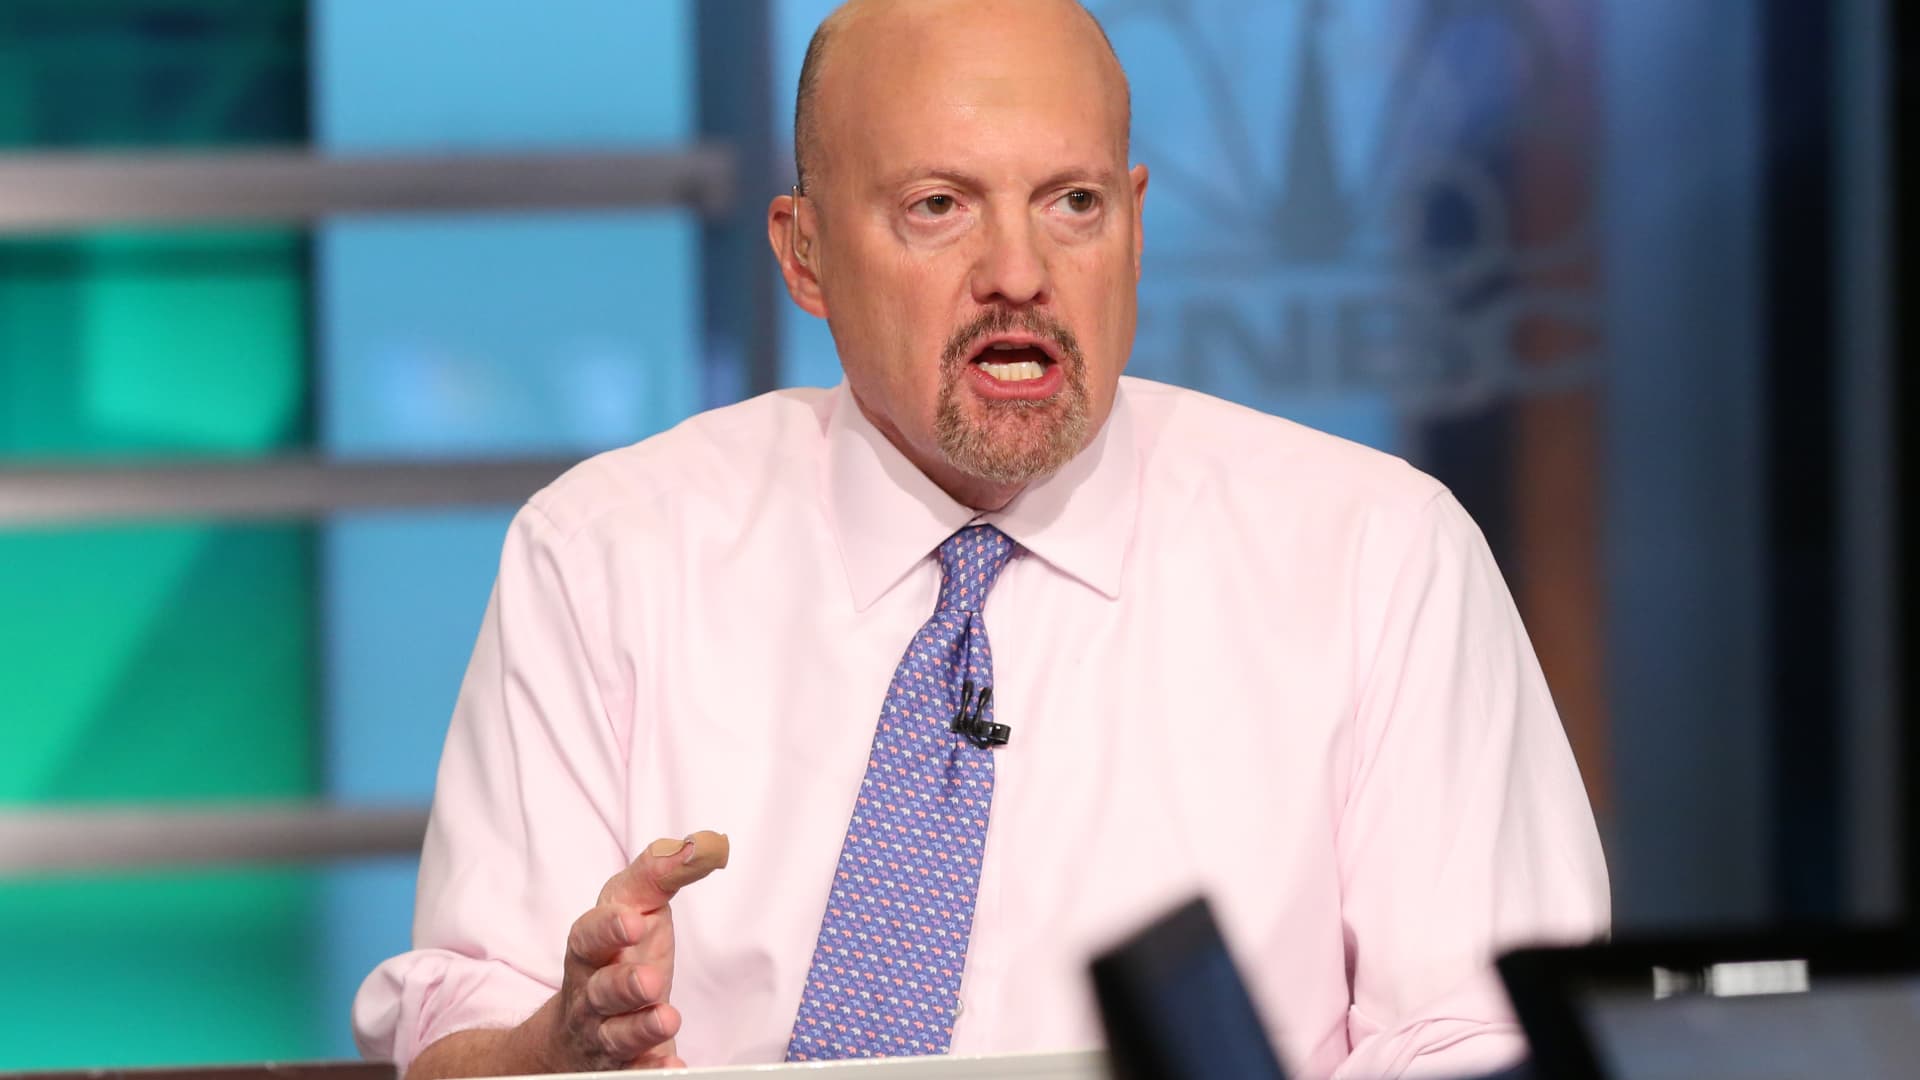 Jim Cramer says to look for ‘sleeper’ stocks as hot names retreat